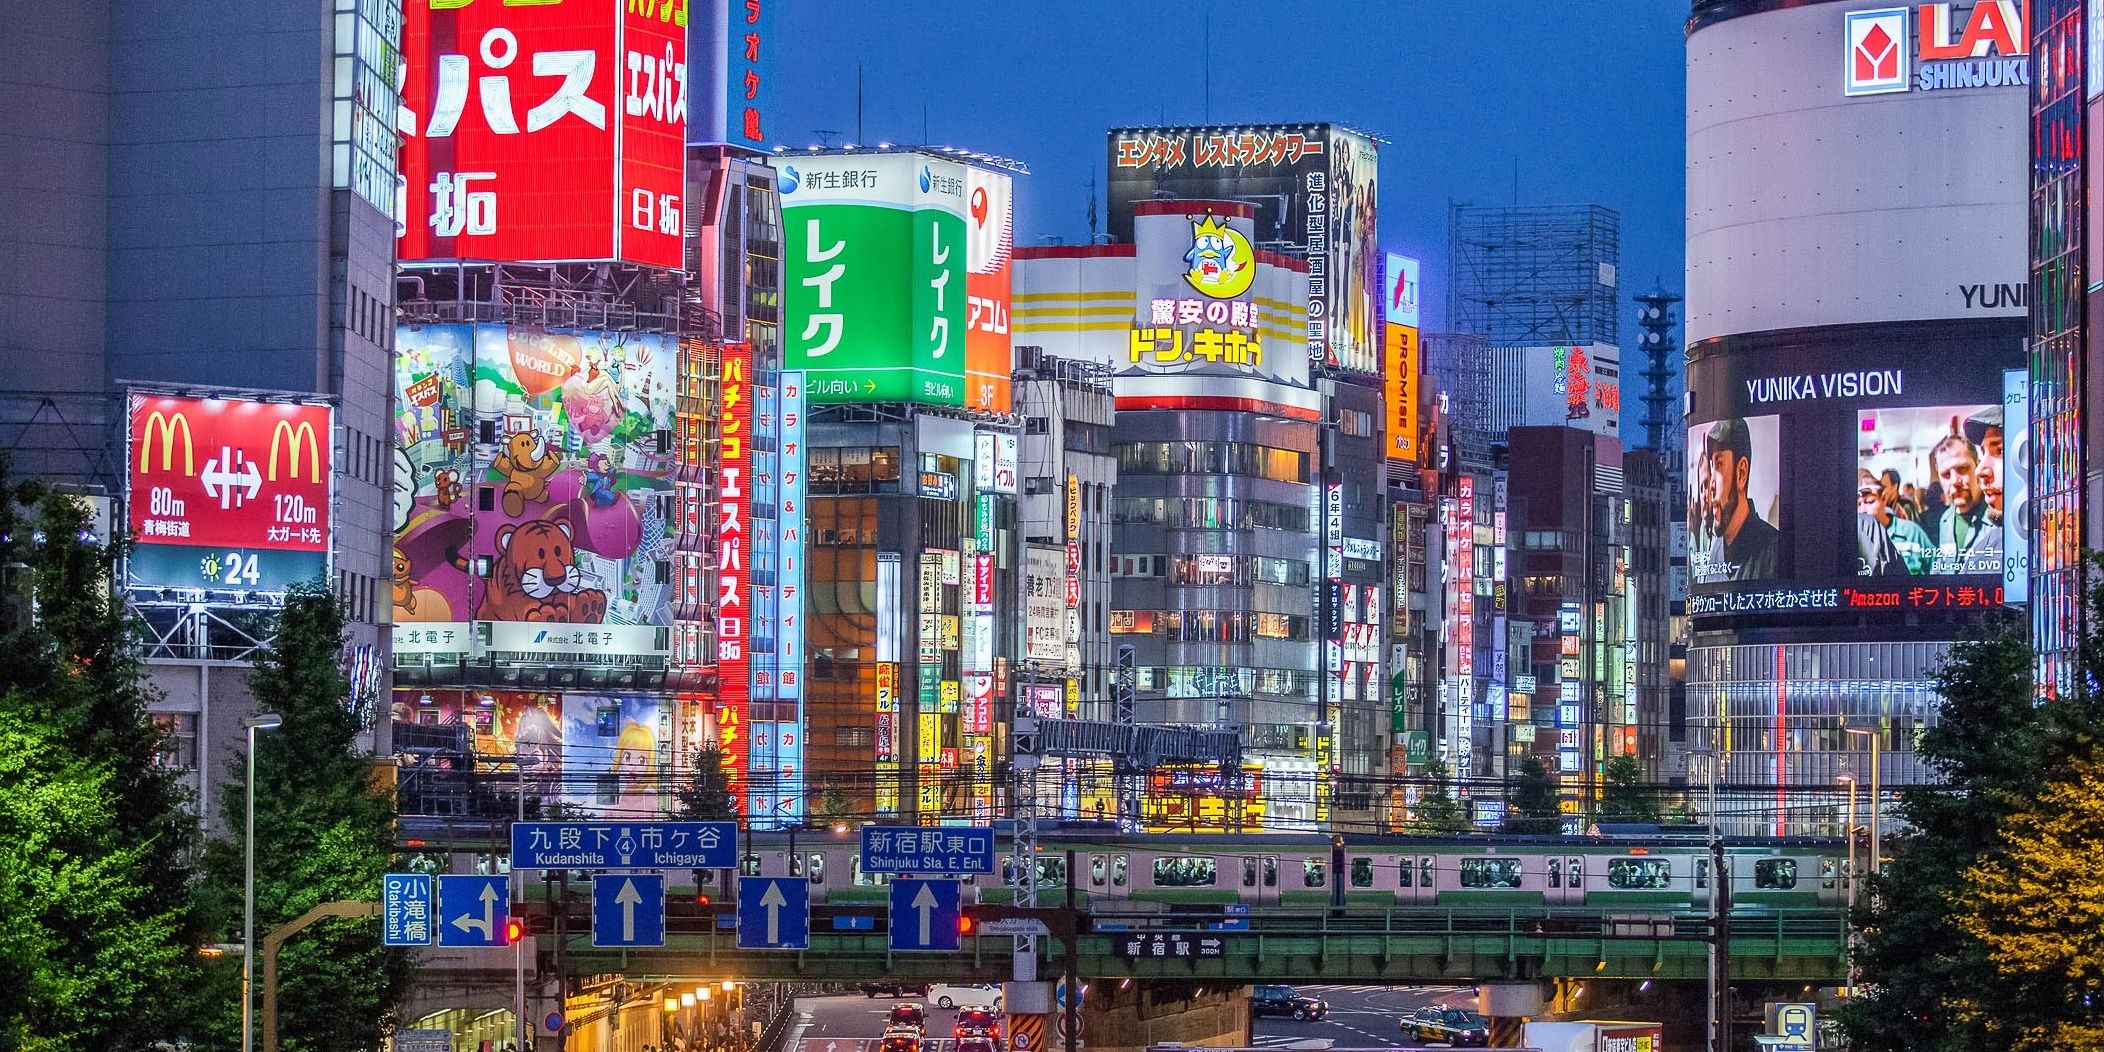 The Shinjuku ward of Tokyo, Japan, which Celadon City in Pokemon is based on